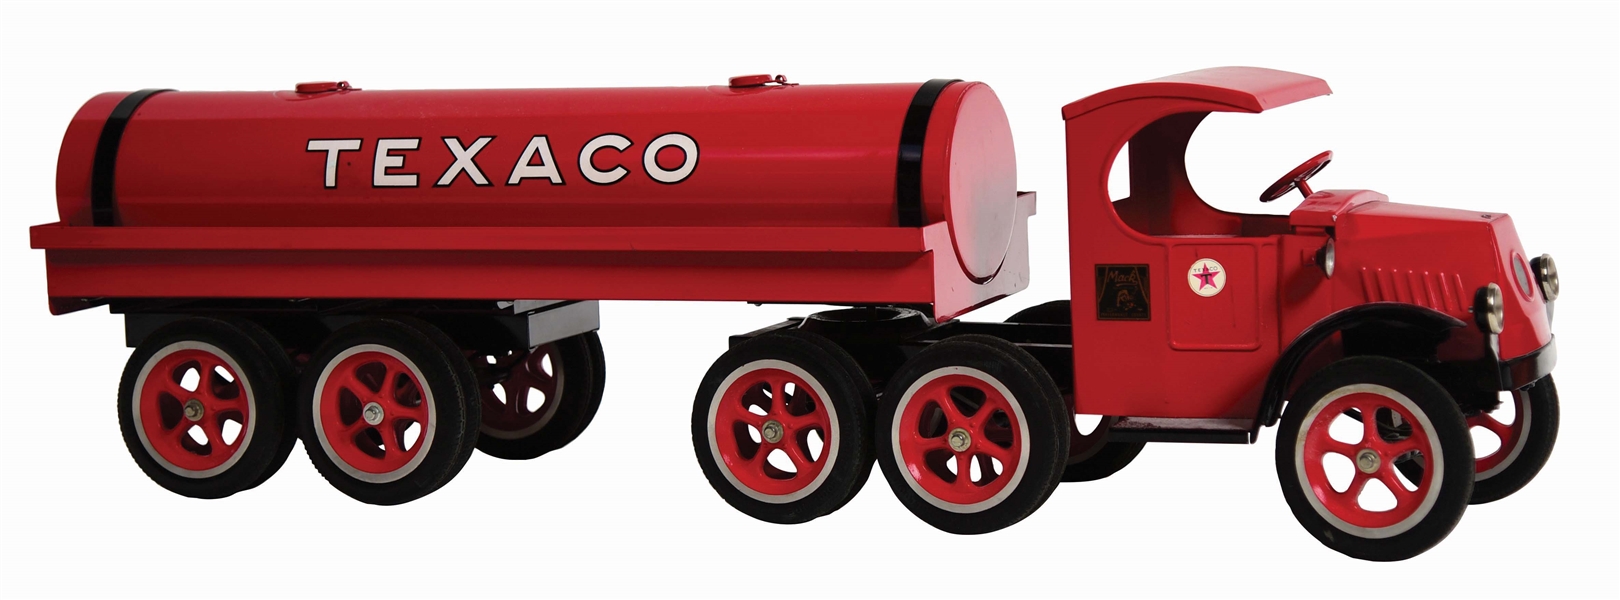 TEXACO GASOLINE PRESSED STEEL MACK TOY TANKER TRUCK MADE BY THE LES PAUL COLLECTOR SERIES. 